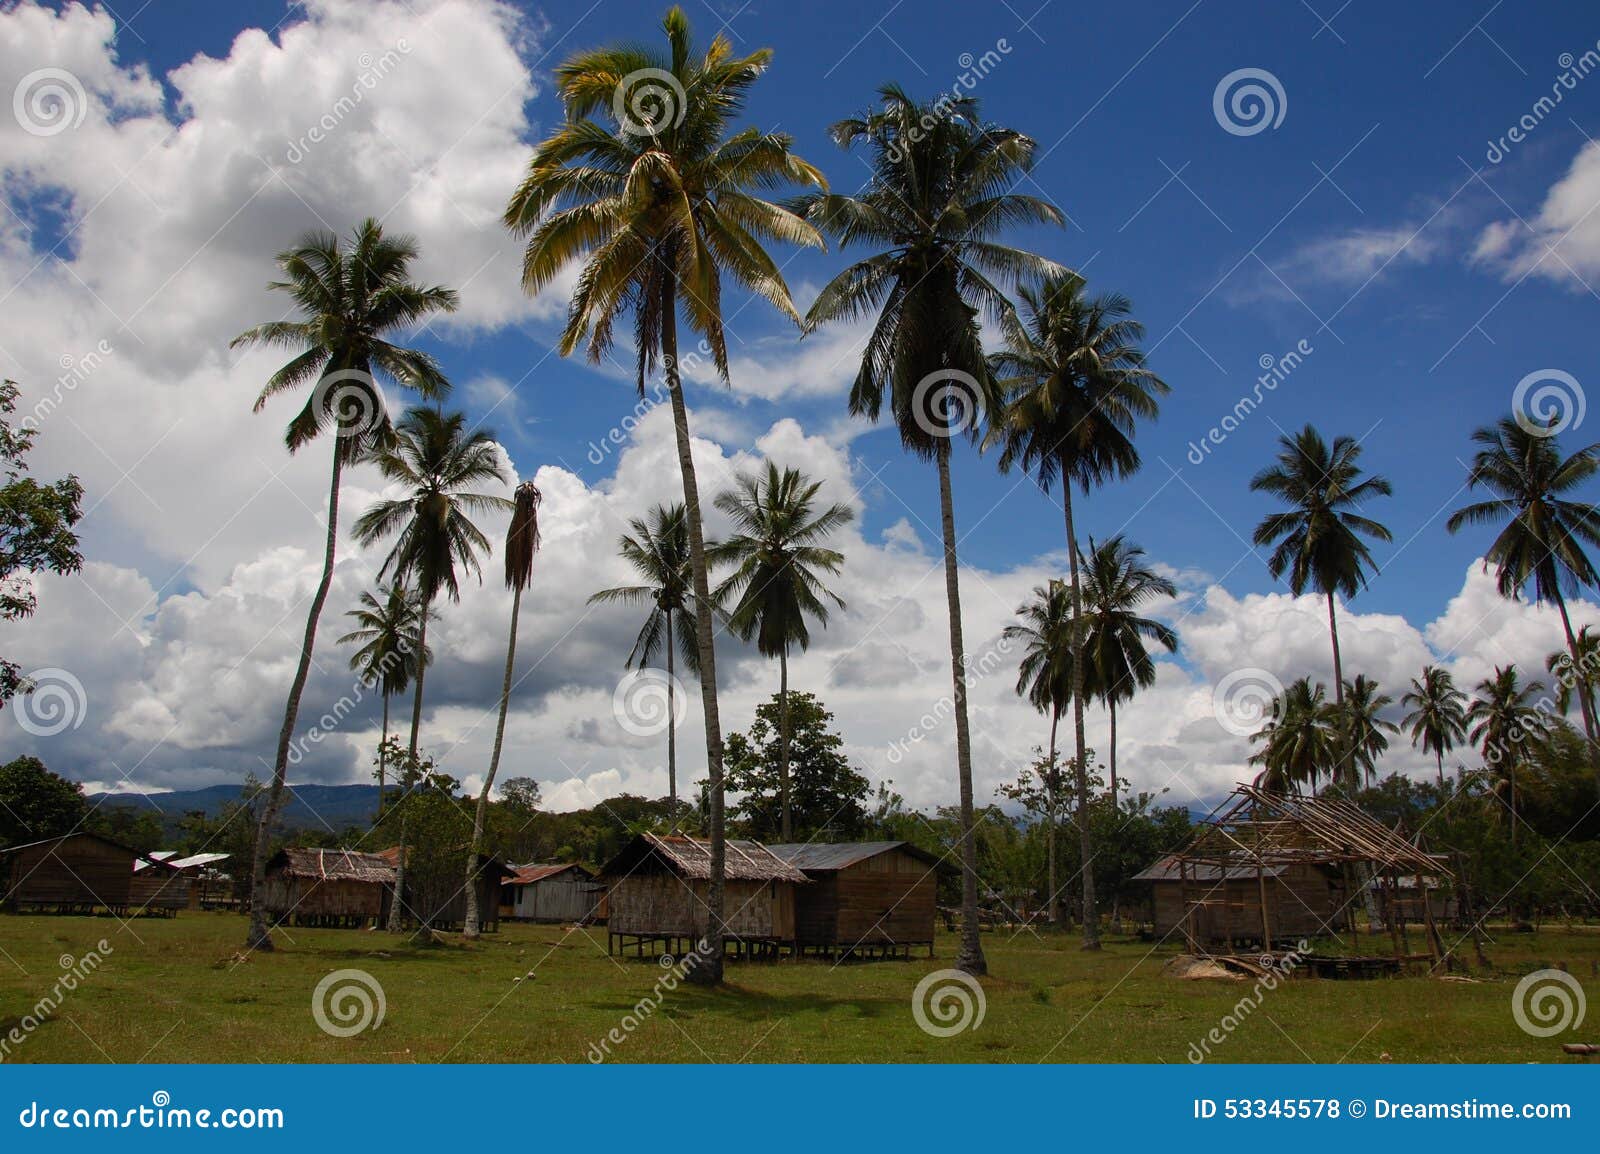 traditional and original village with palmtrees in west papua